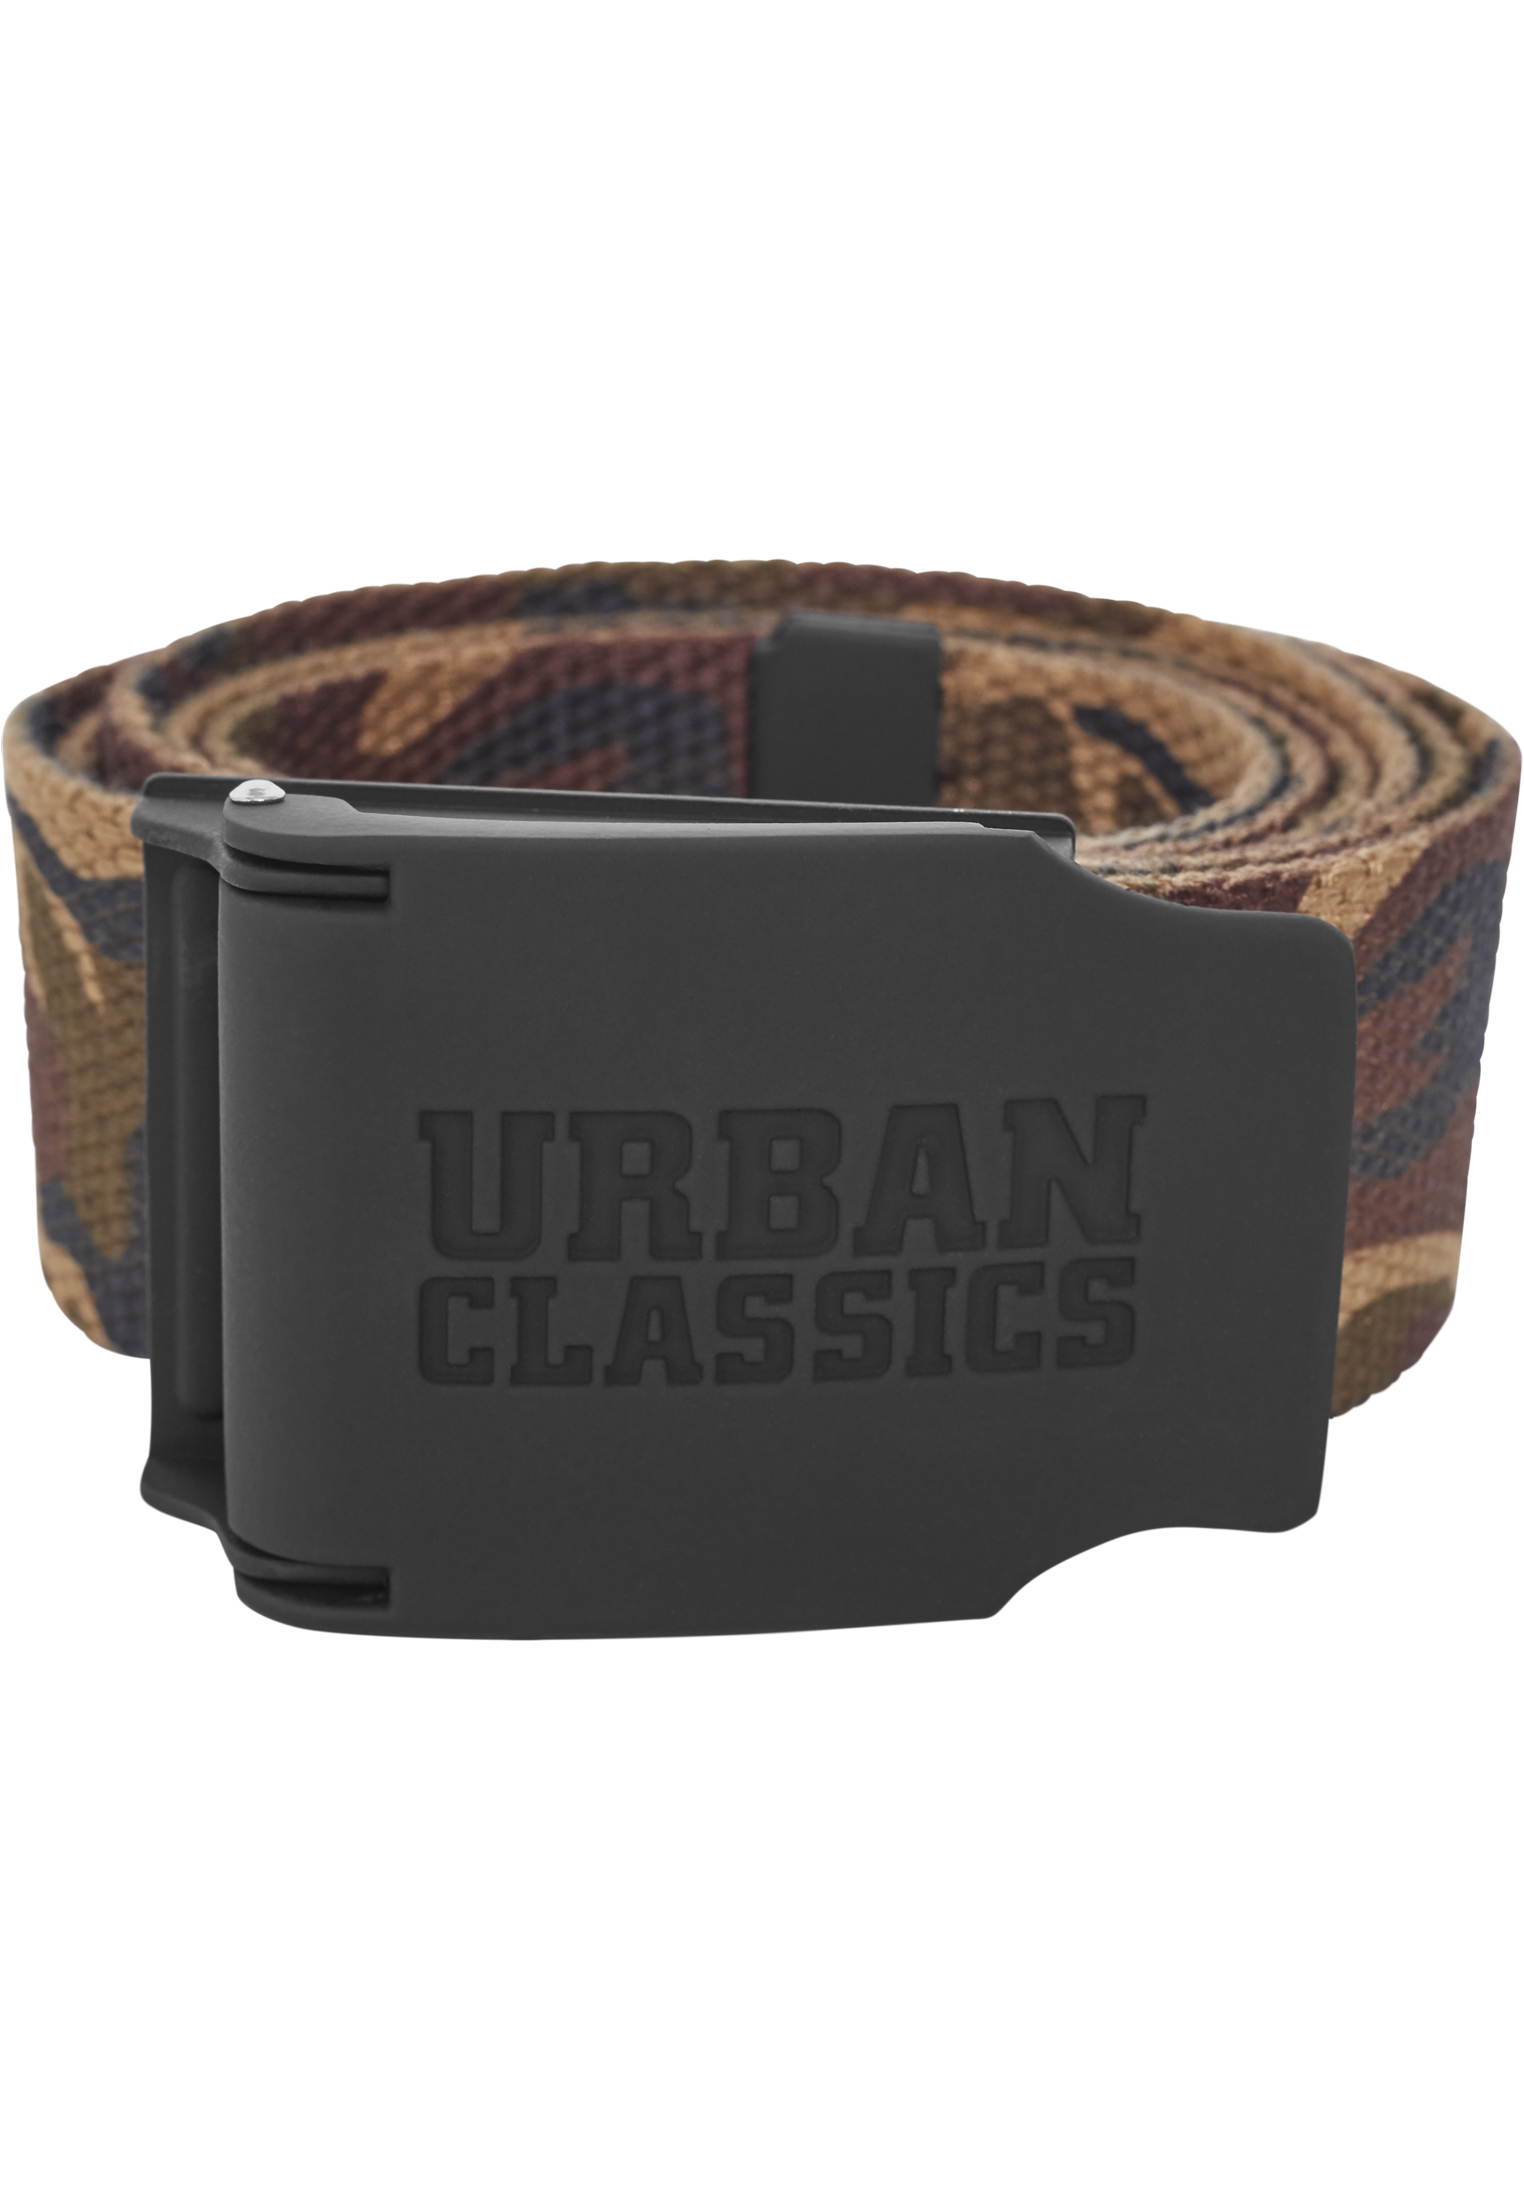 Woven Belt Rubbered Touch UC Wooden Camouflage